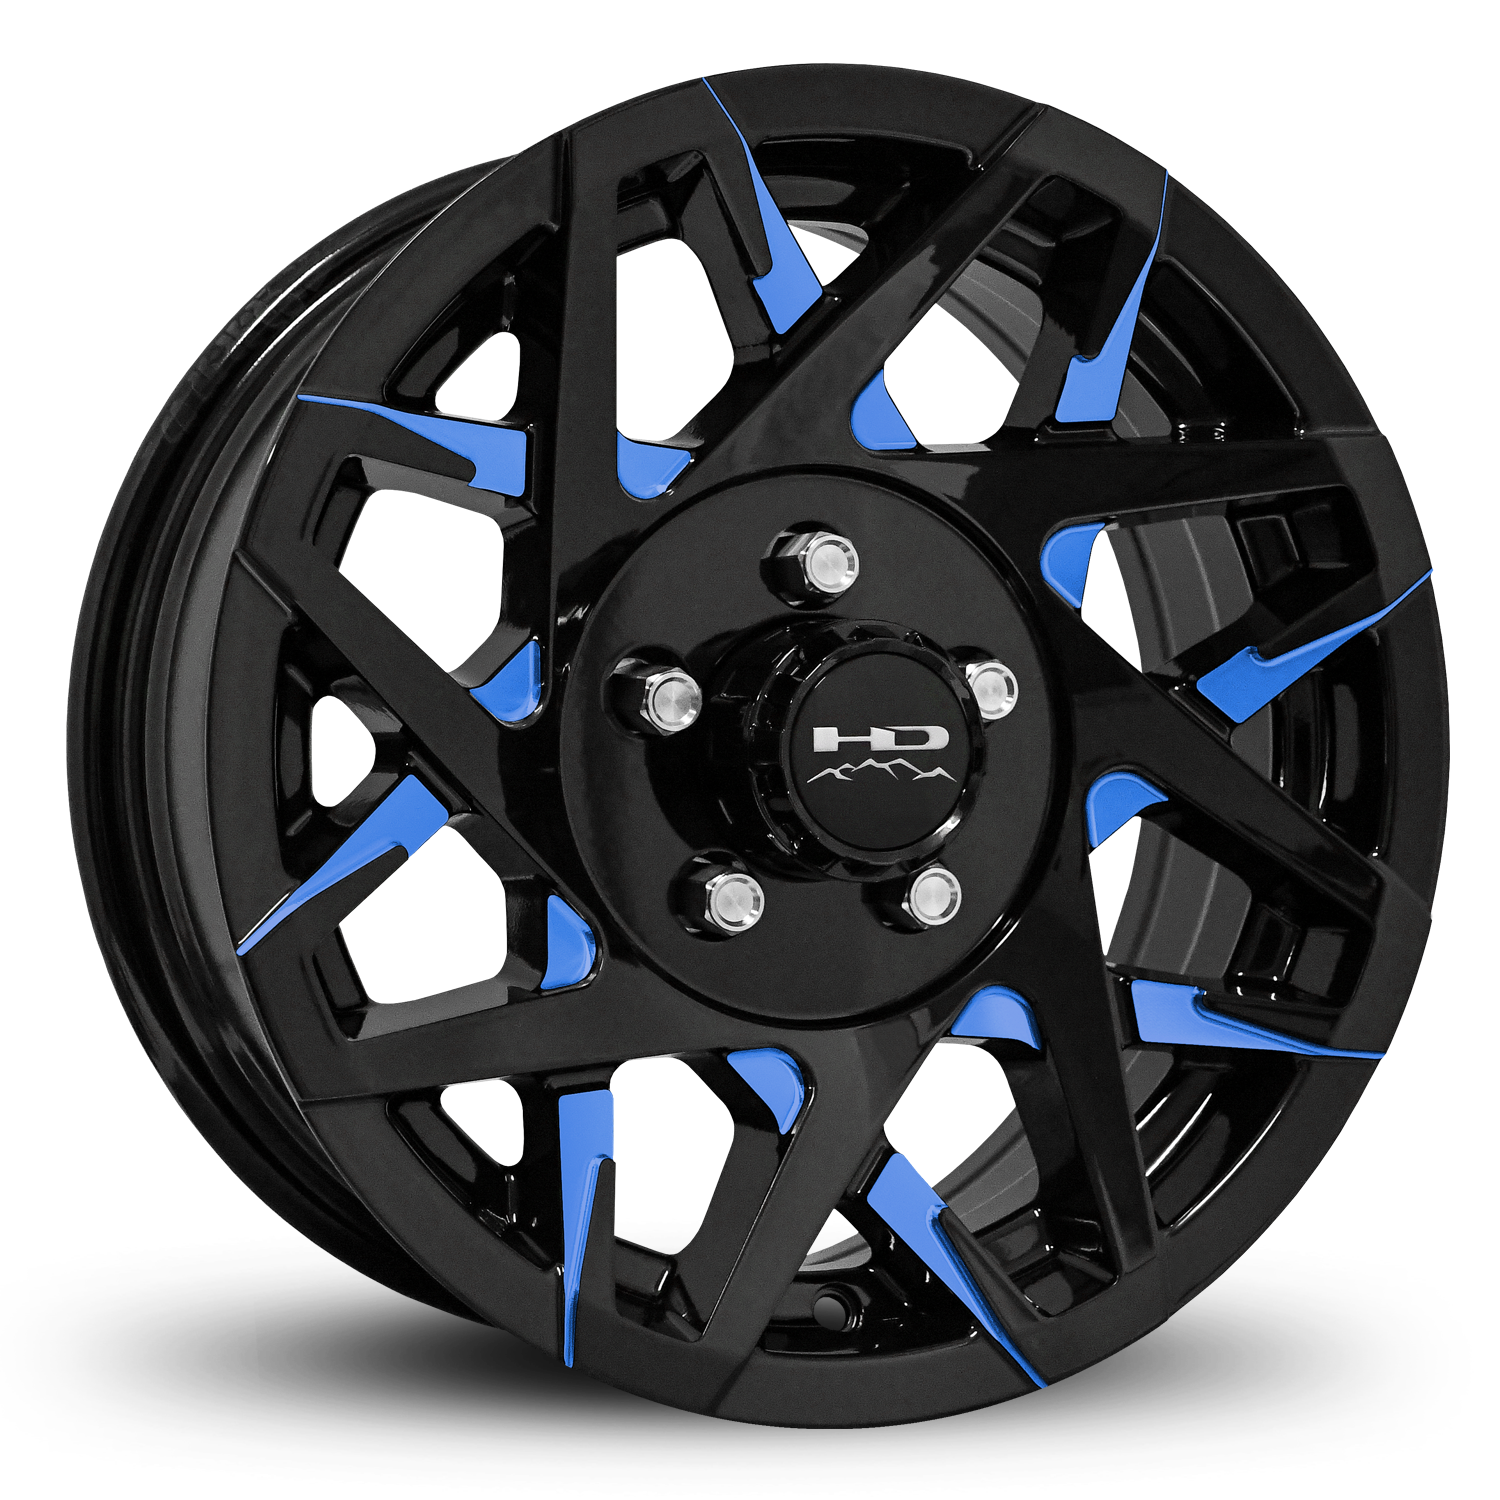 HD Off-Road Canyon Custom Trailer Wheel Rims in 14x5.5 Gloss Black CNC Milled Face with Blue Clear Coat Spokes with Center Cap & Logo fits 5x4.50 / 5x114.3 Axle Boat, Car, RV, Travel, Concession, Horse, Utility, Lawn & Garden, & Landscaping.